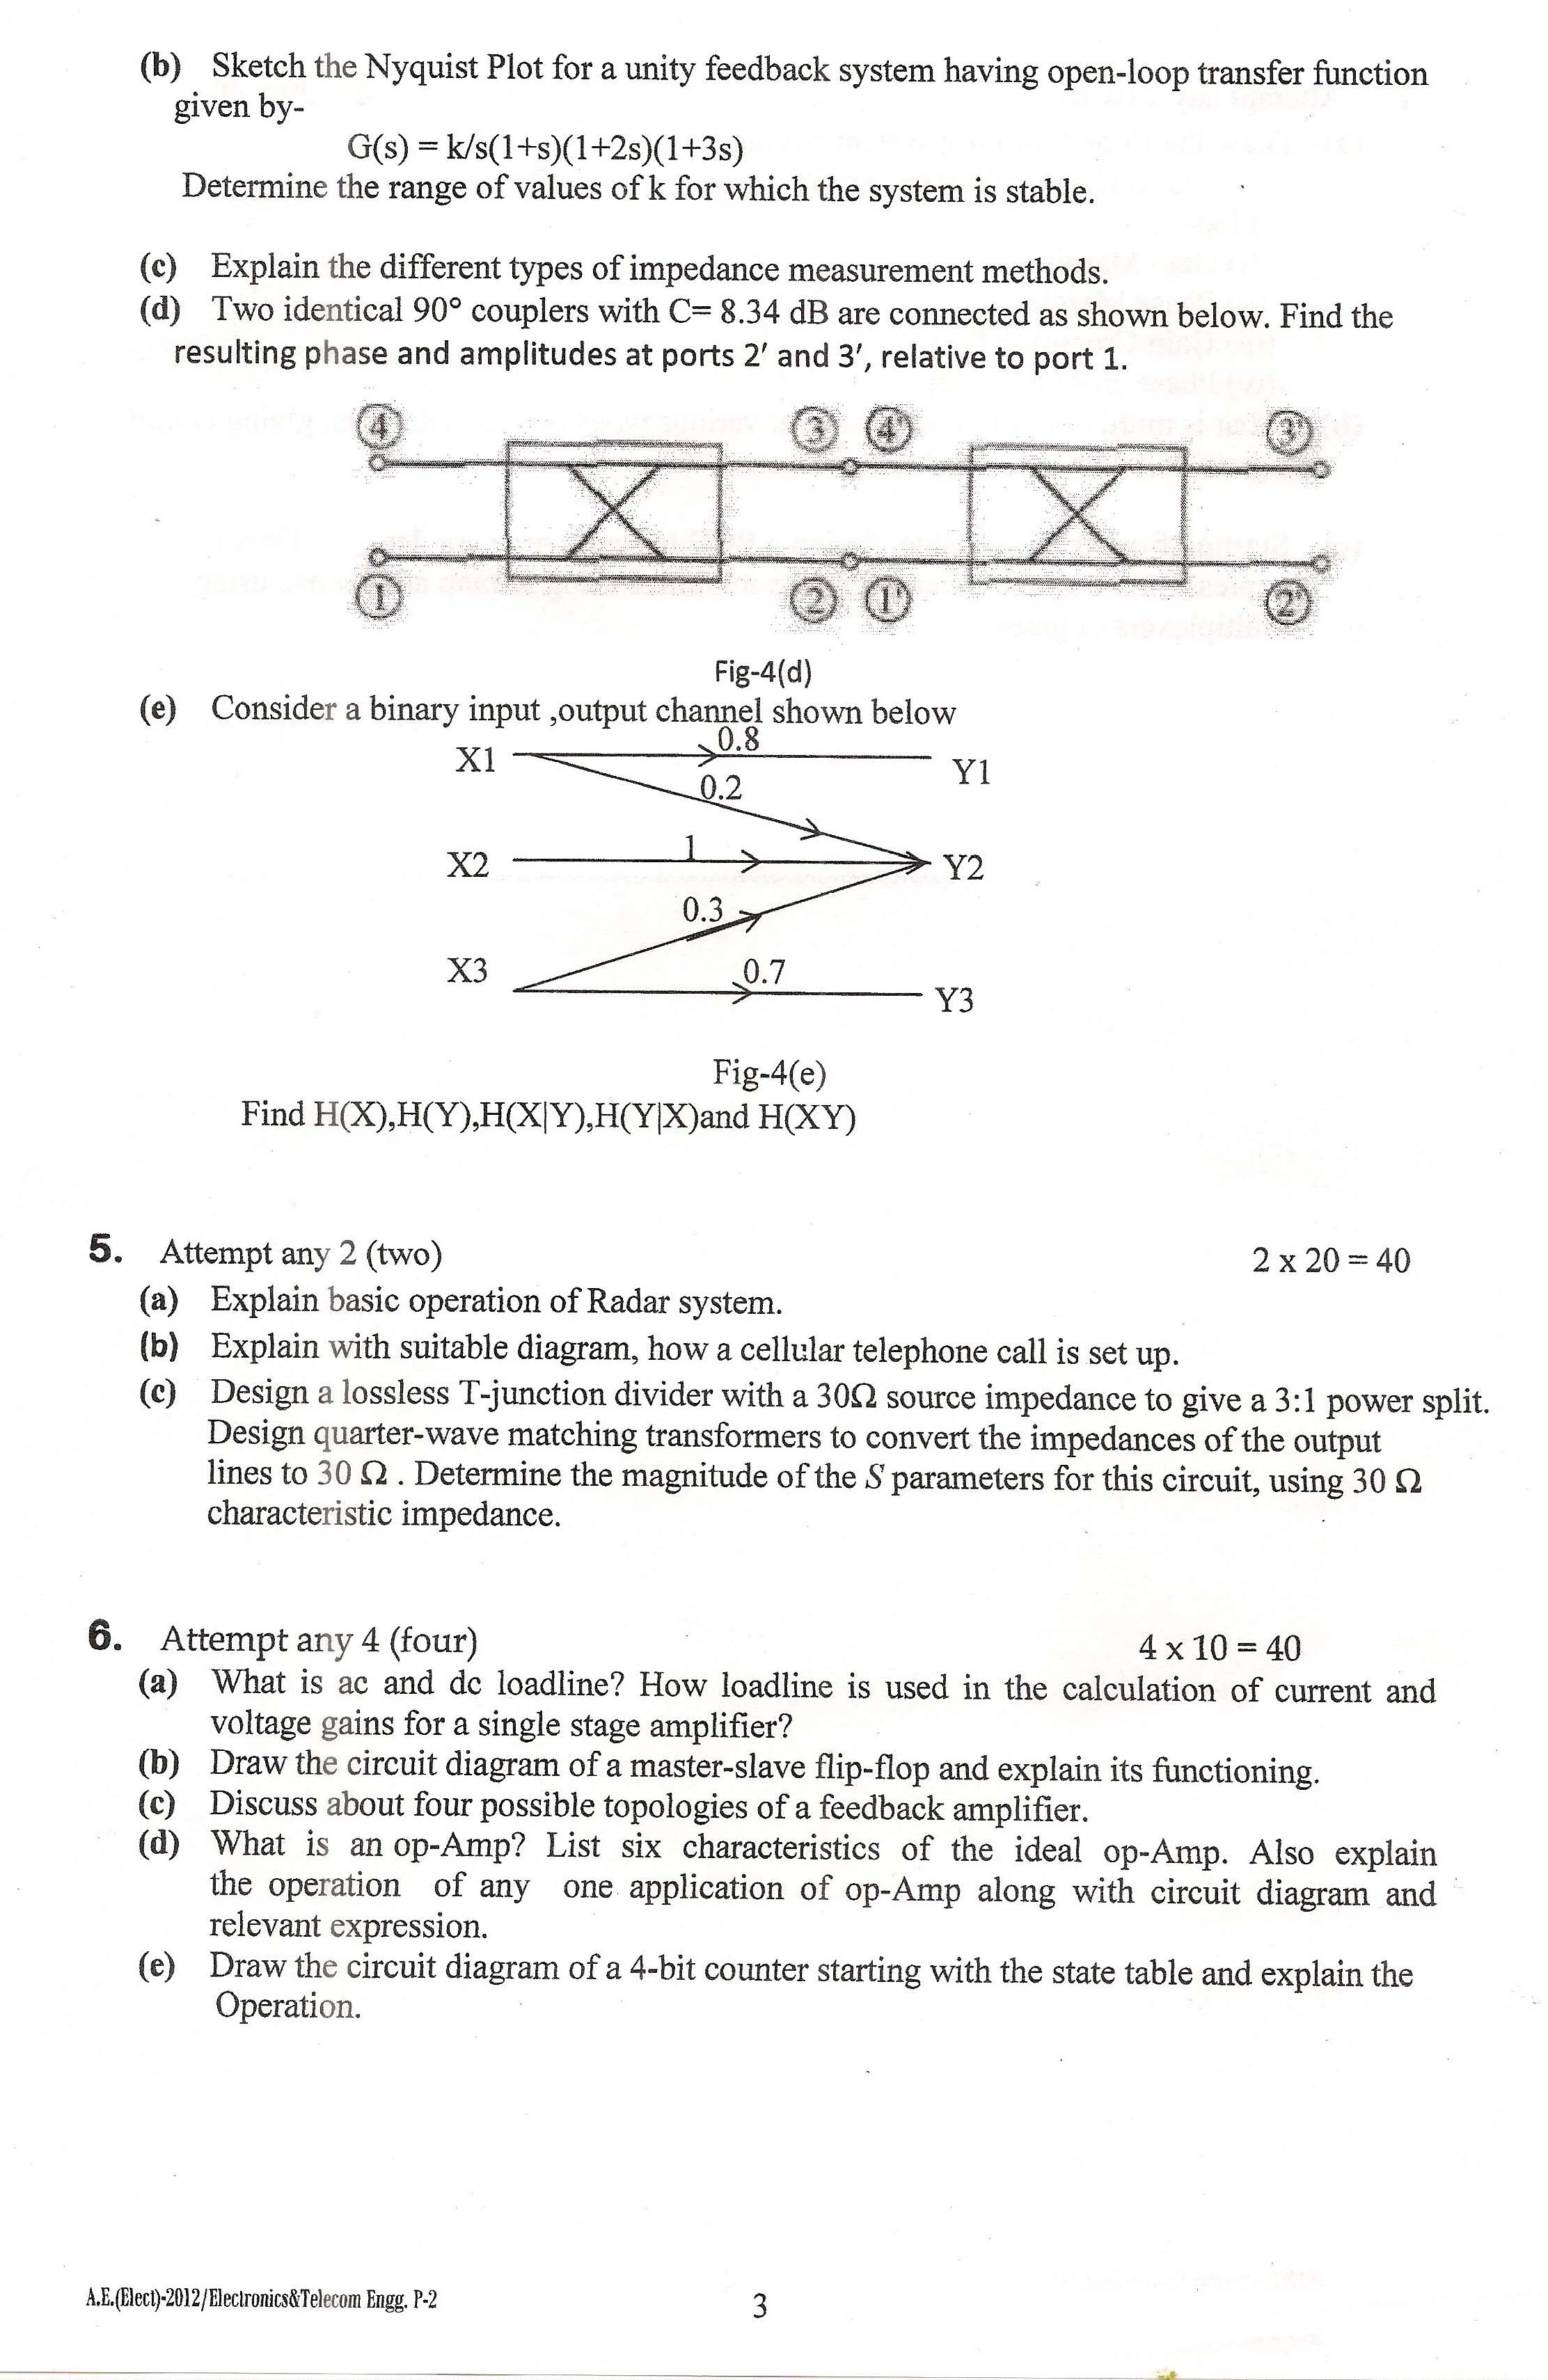 APPSC AE Electrical Exam 2012 Electronics and Telecommunication Paper II 3